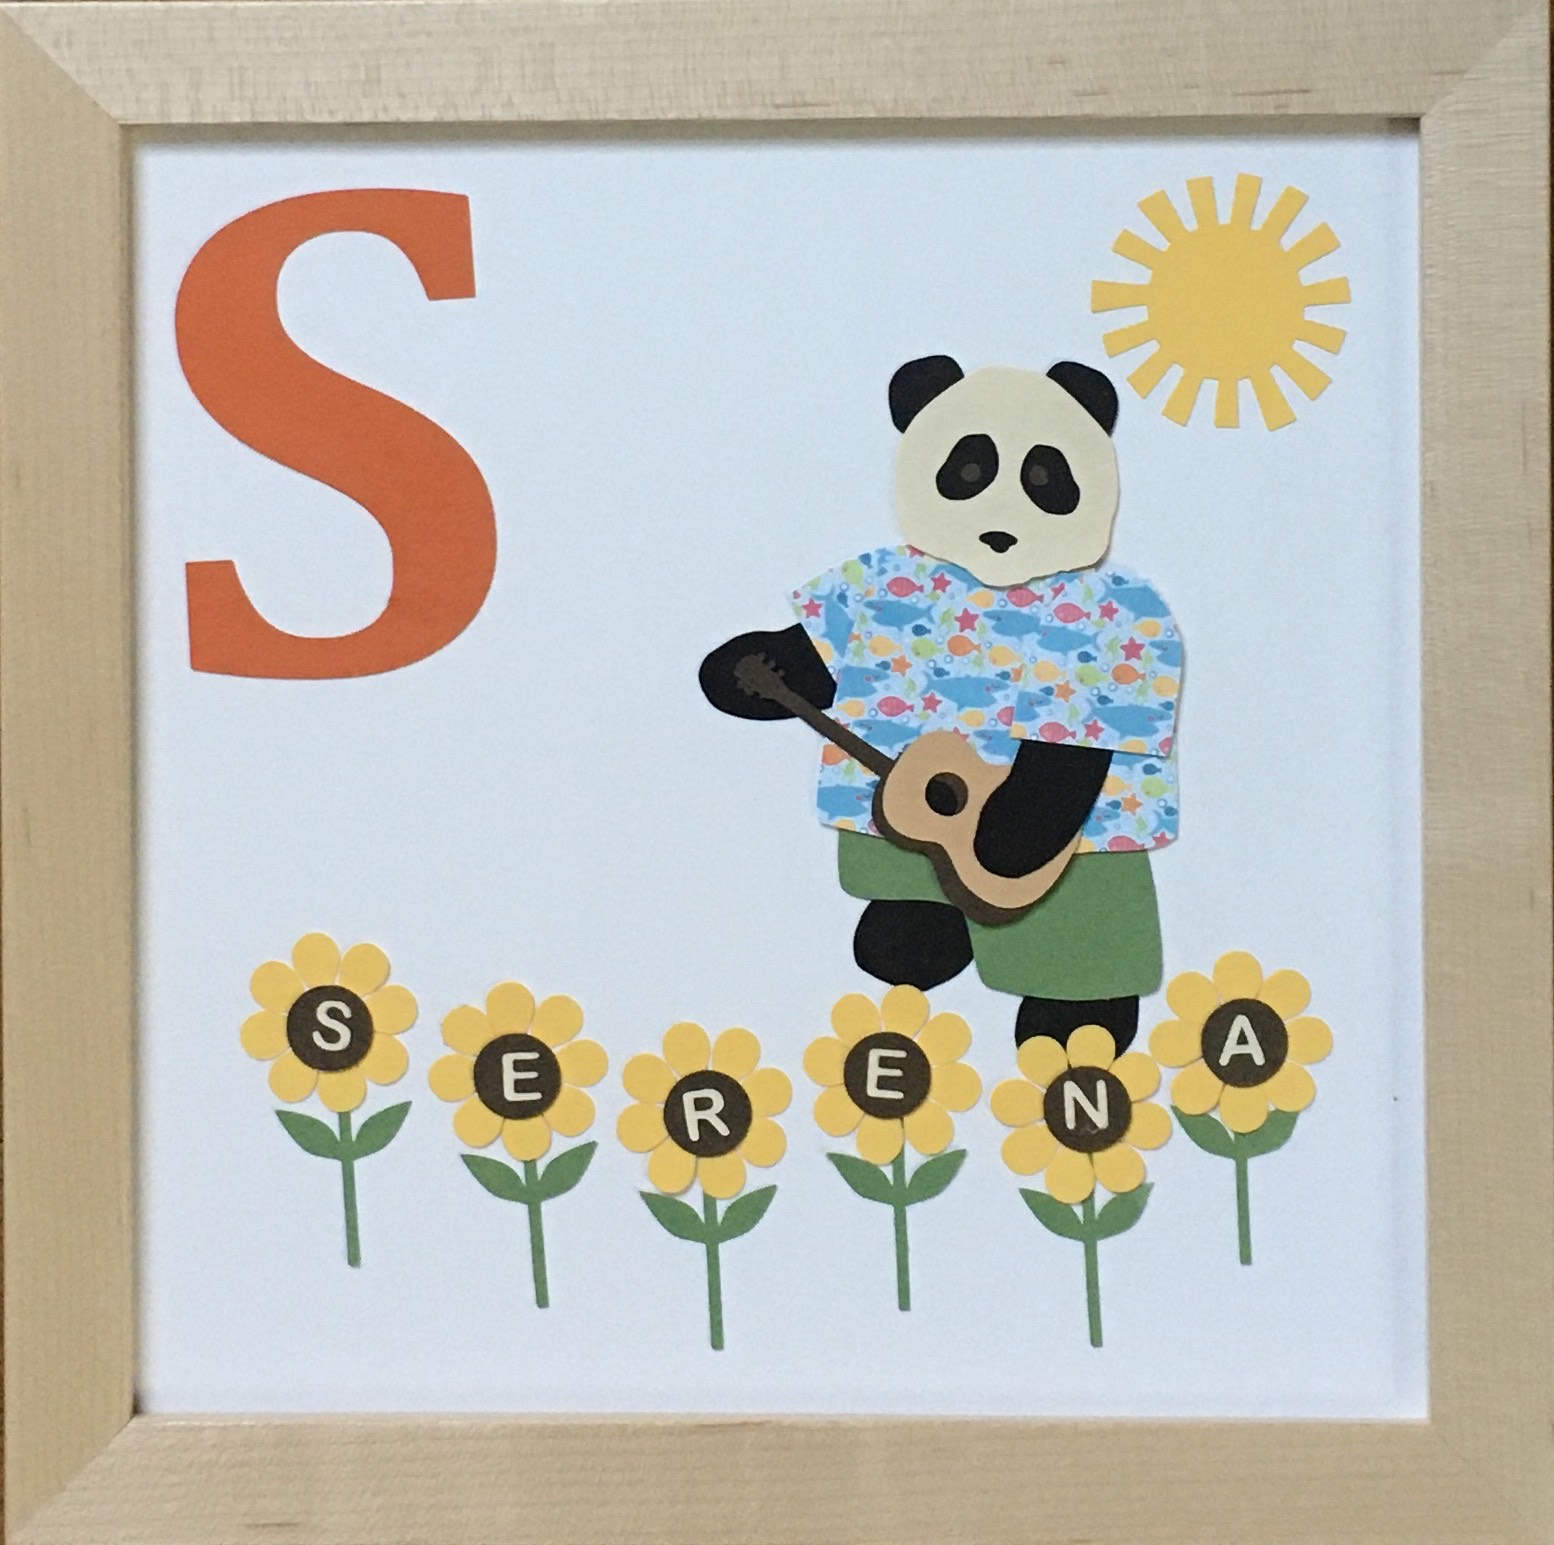 S for Serena, panda with sunflowers, sun, and a shark shirt, plus ukulele requested by the client